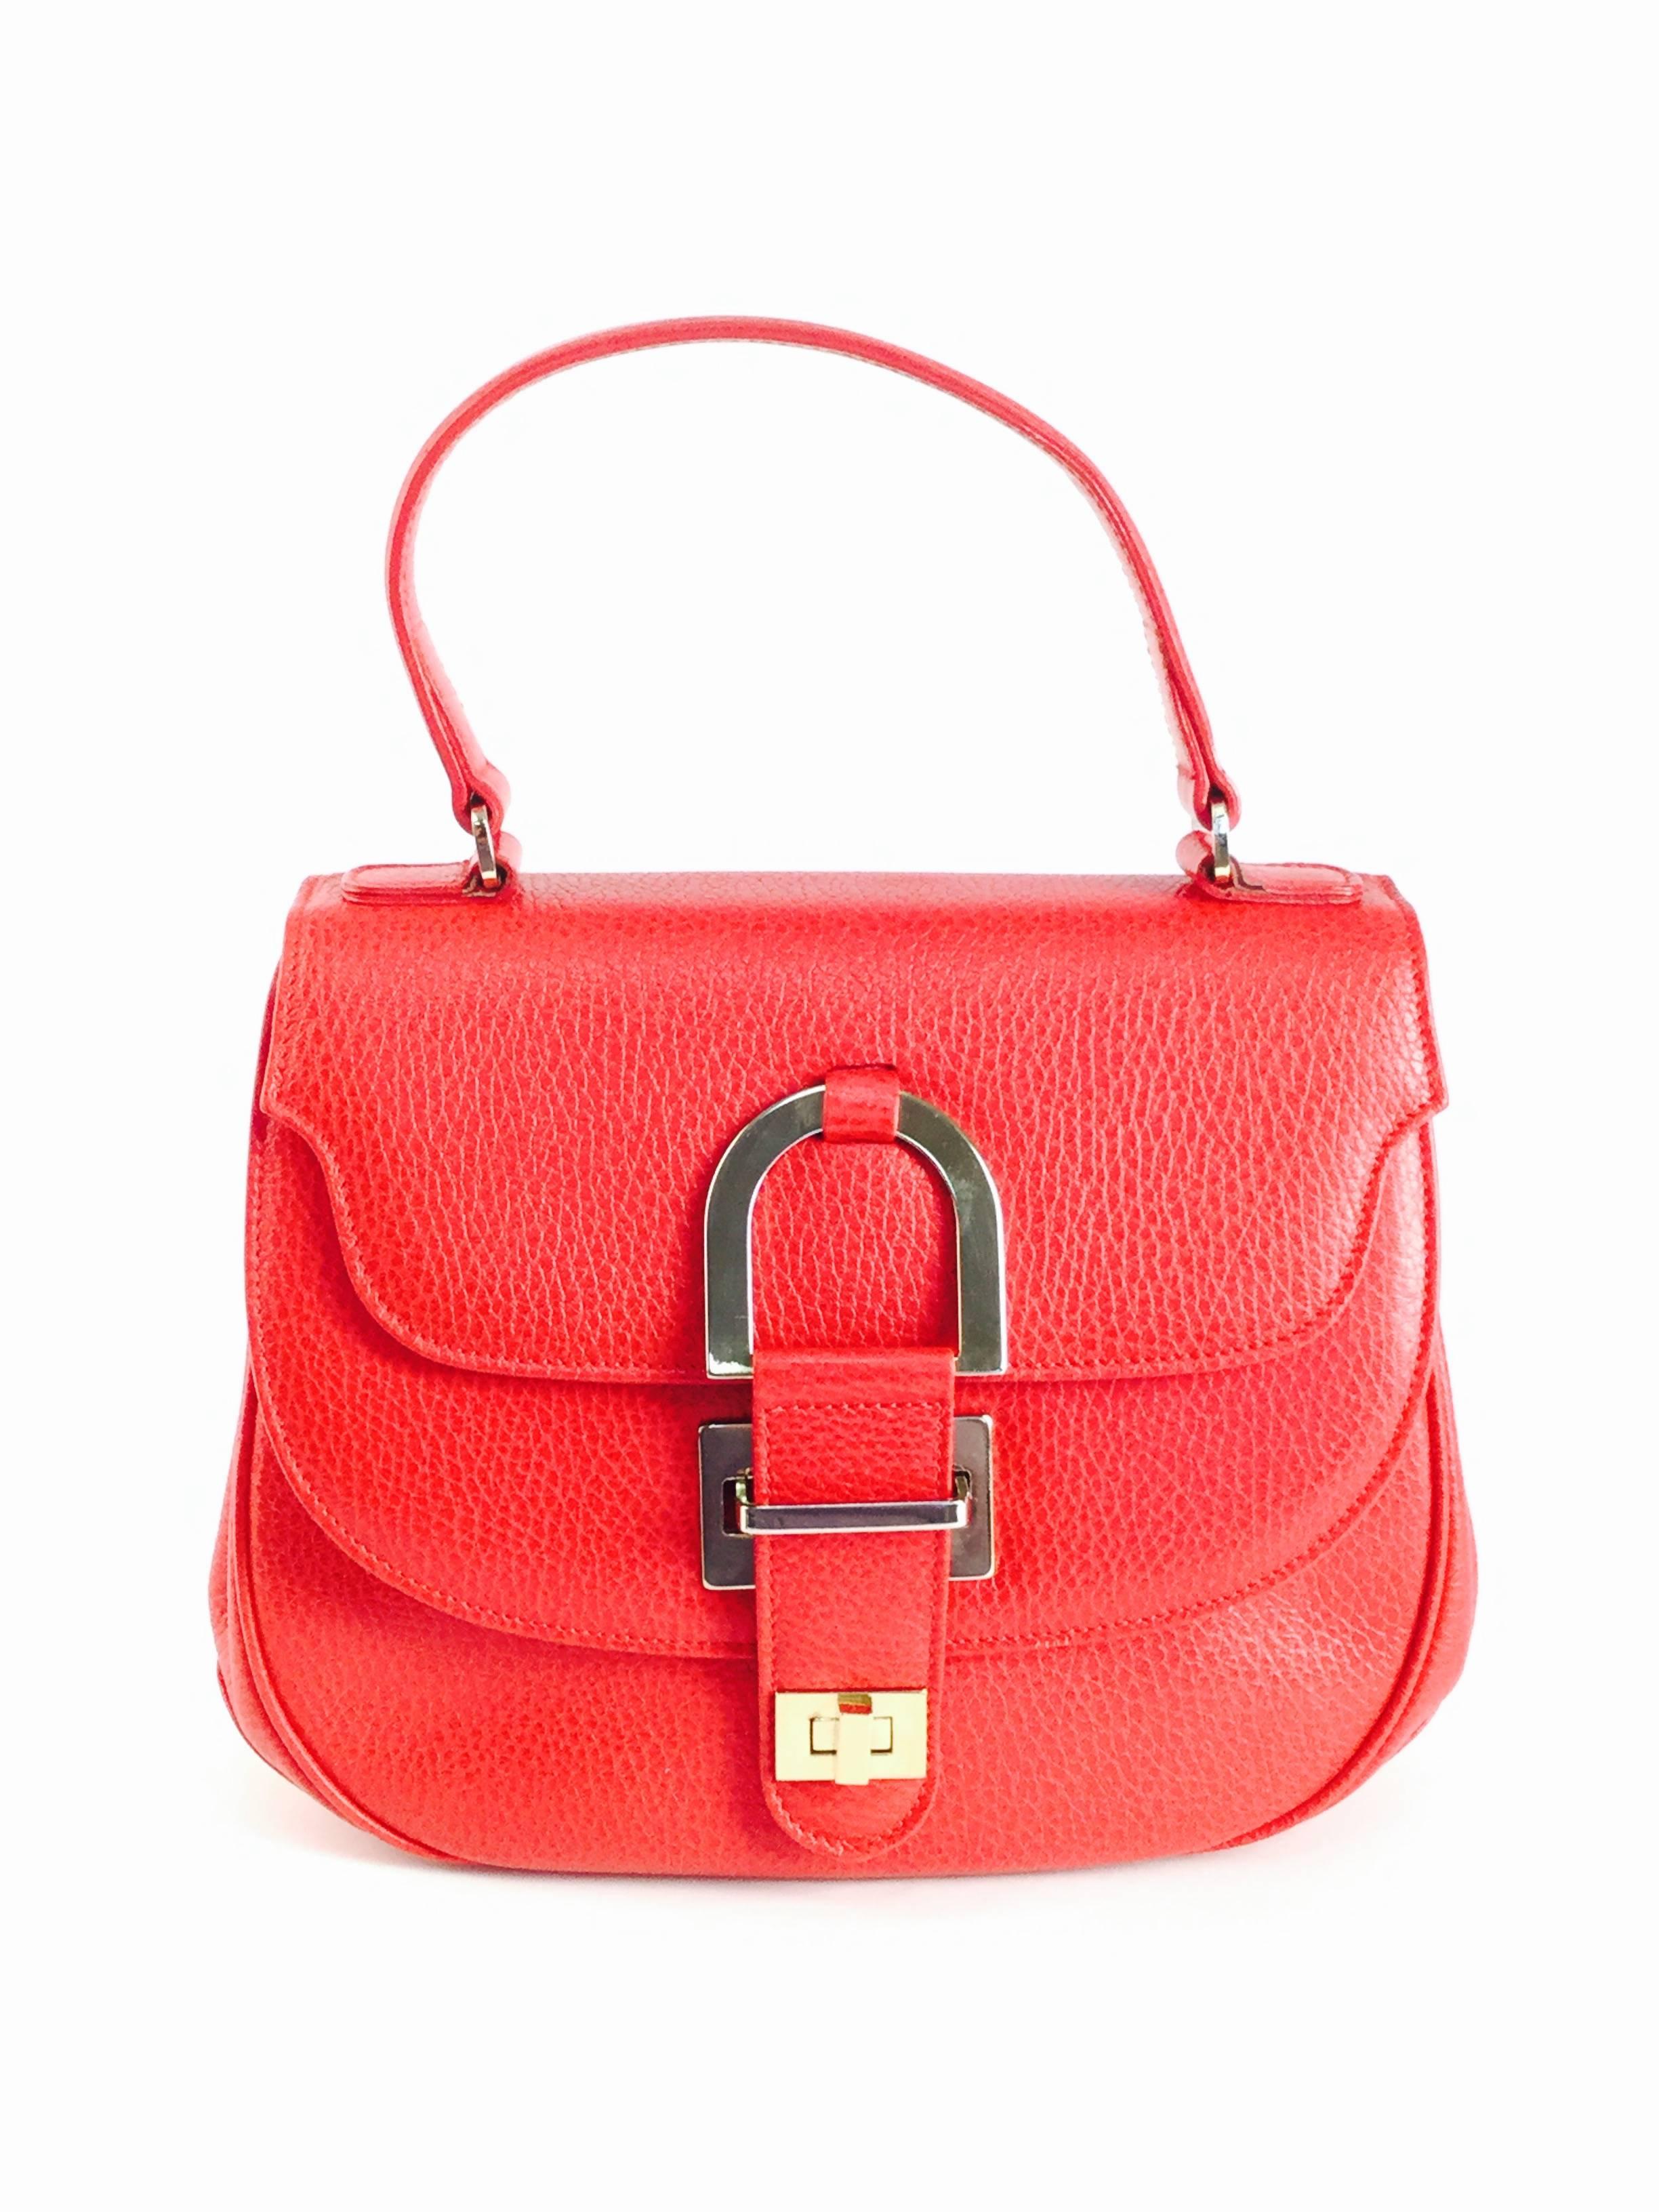 
Gorgeous double flap bag by Oscar de la Renta! This top grain red leather bag has a top handle and features two separate compartments, each covered by a curved edge flap; the topmost flap has a pointed beveled cut. Both compartments are lined in